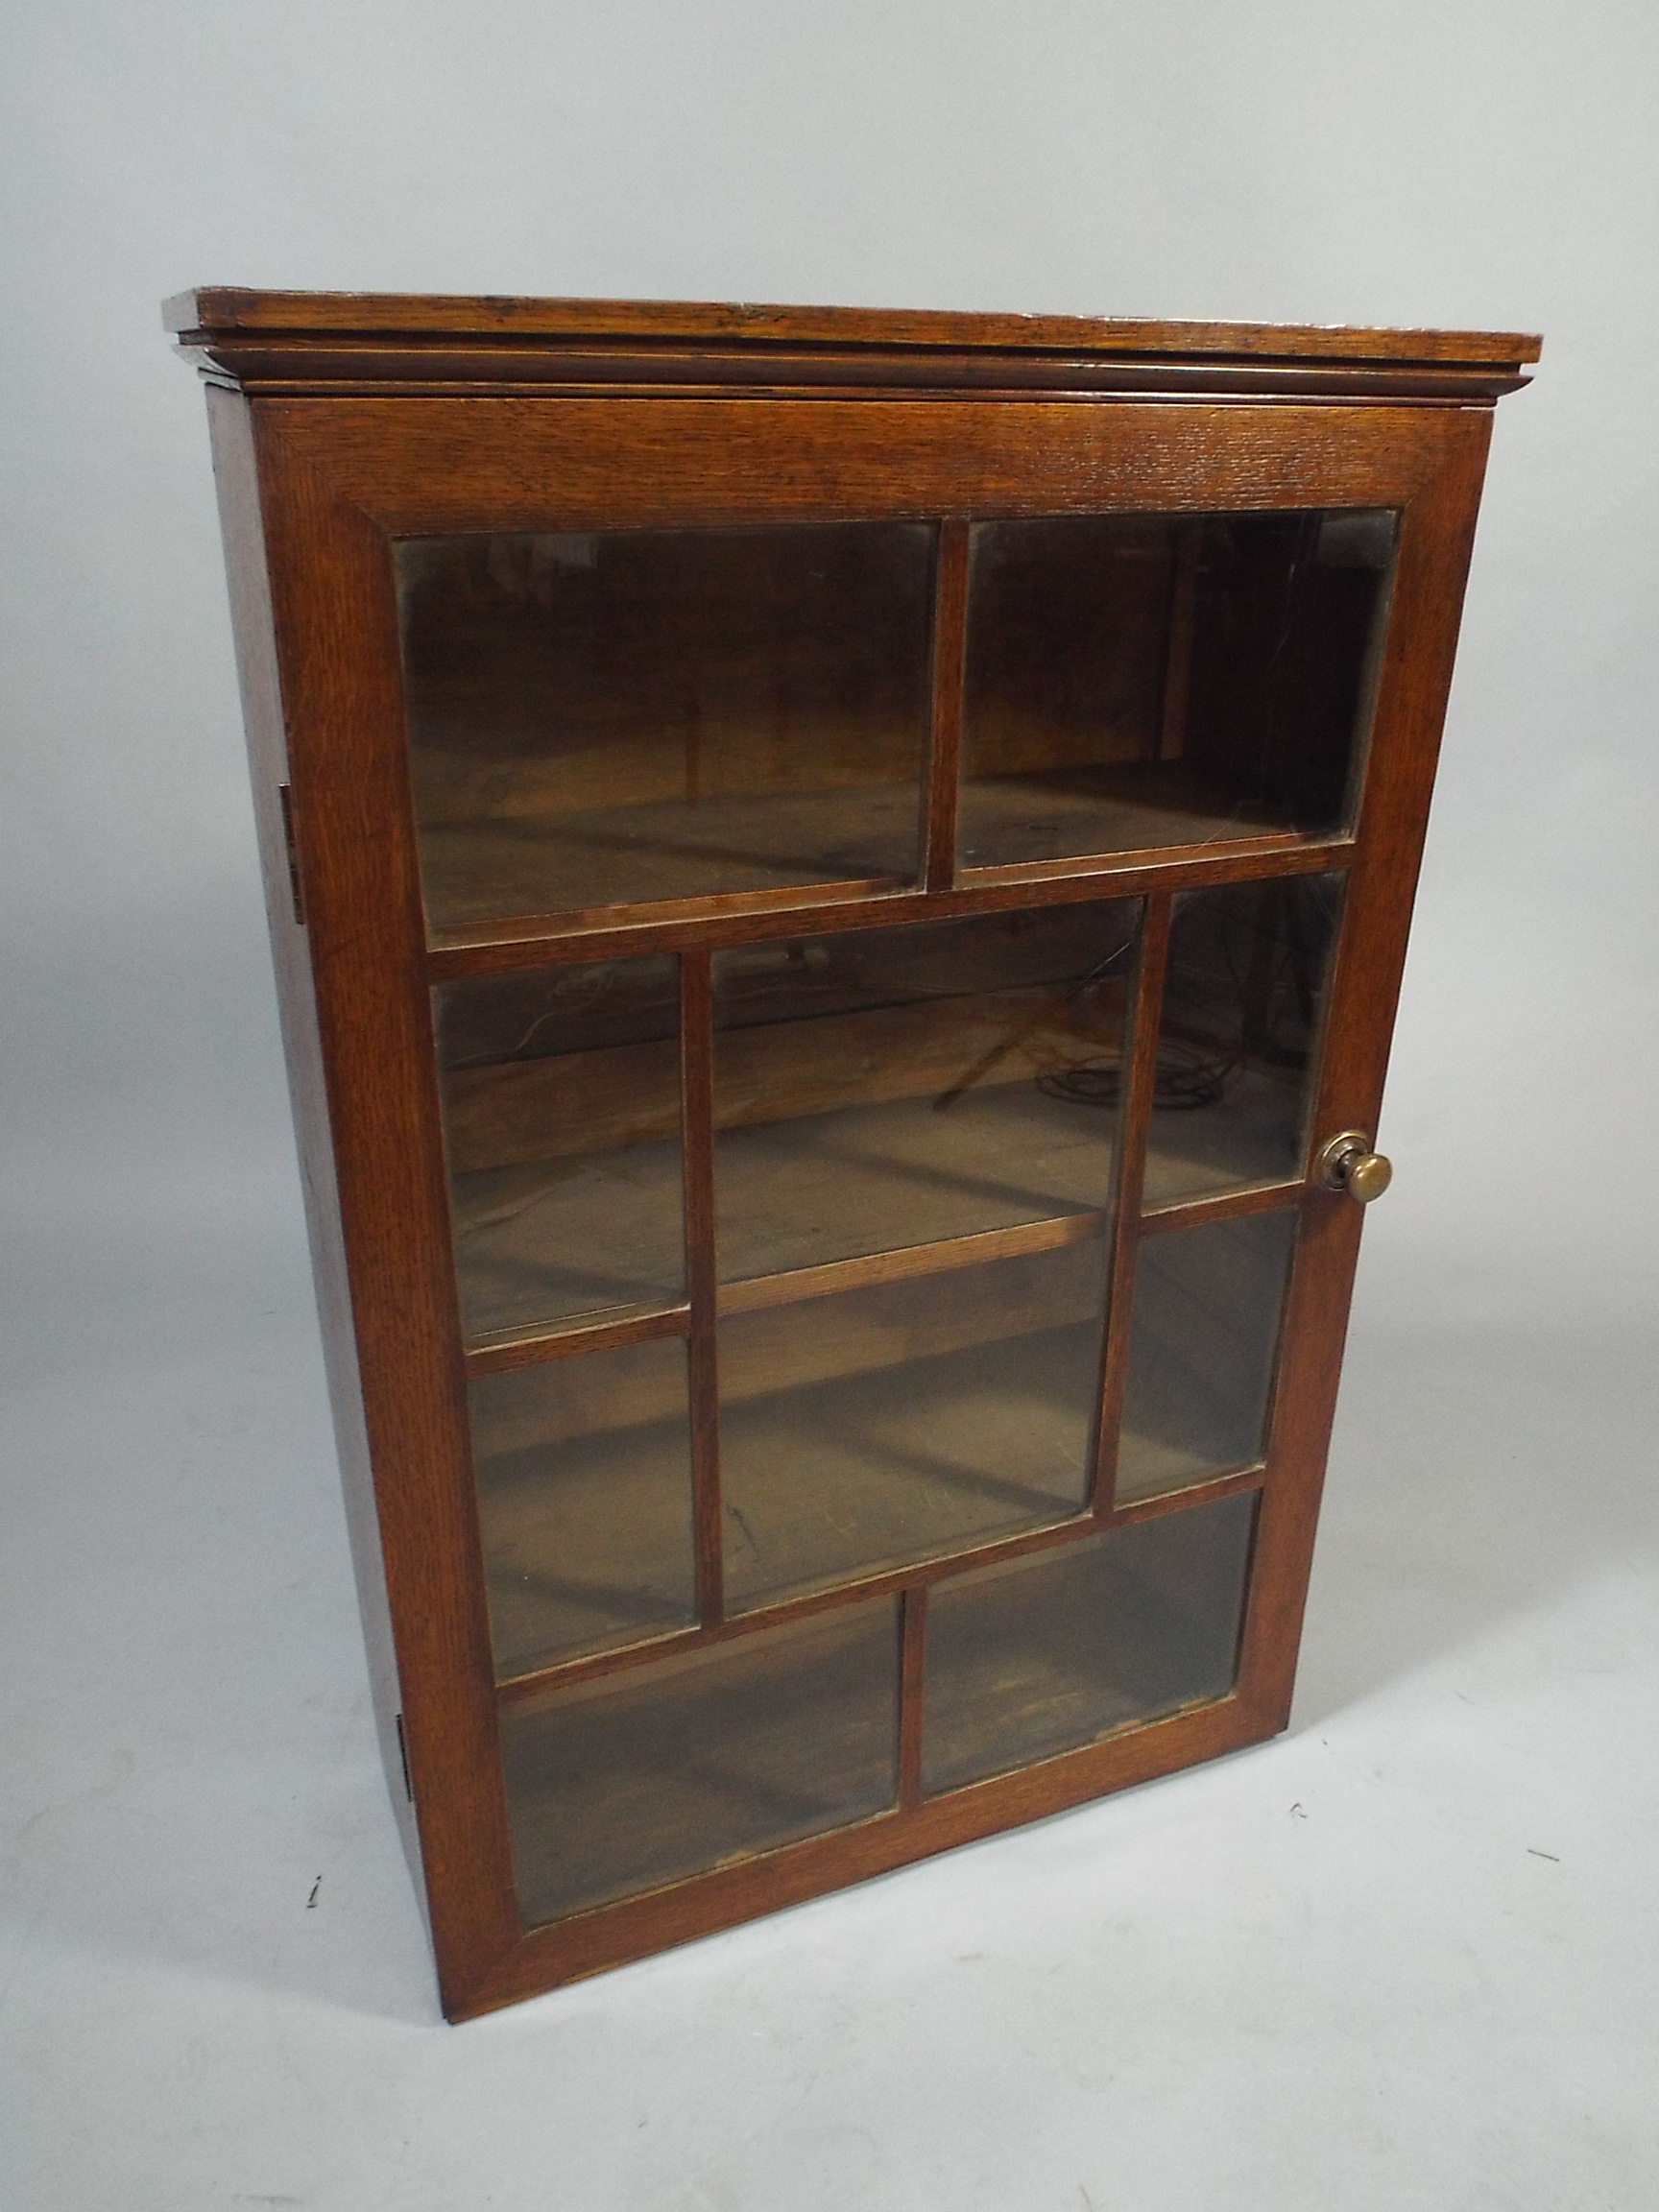 A 19th Century Oak Wall Hanging Cupboard, with a Moulded Cornice Over a Glazed Door with Nine